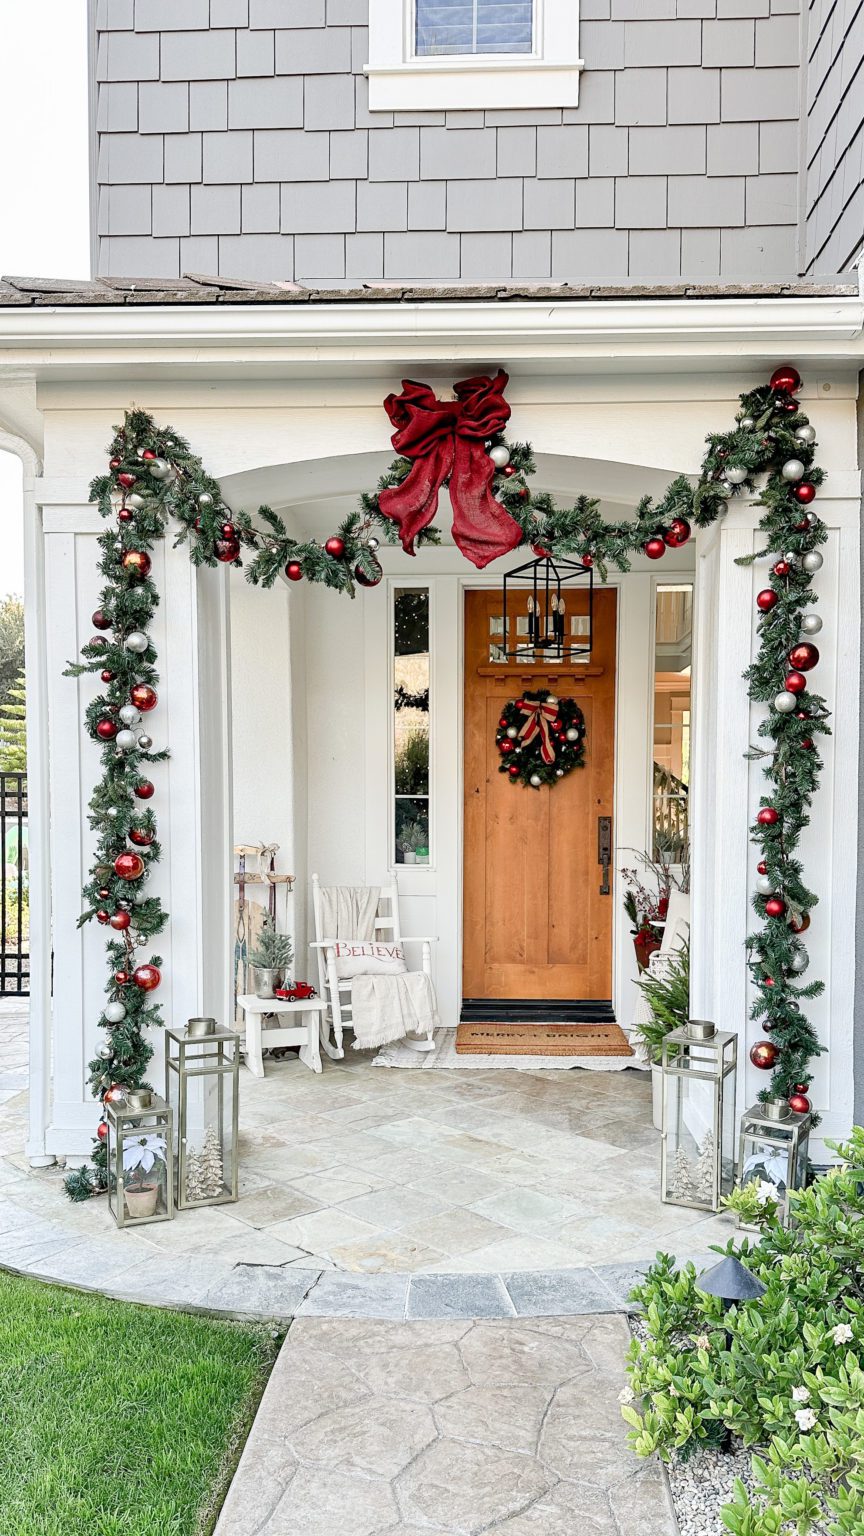 Merry Ways to Decorate your Outdoor Spaces for Christmas